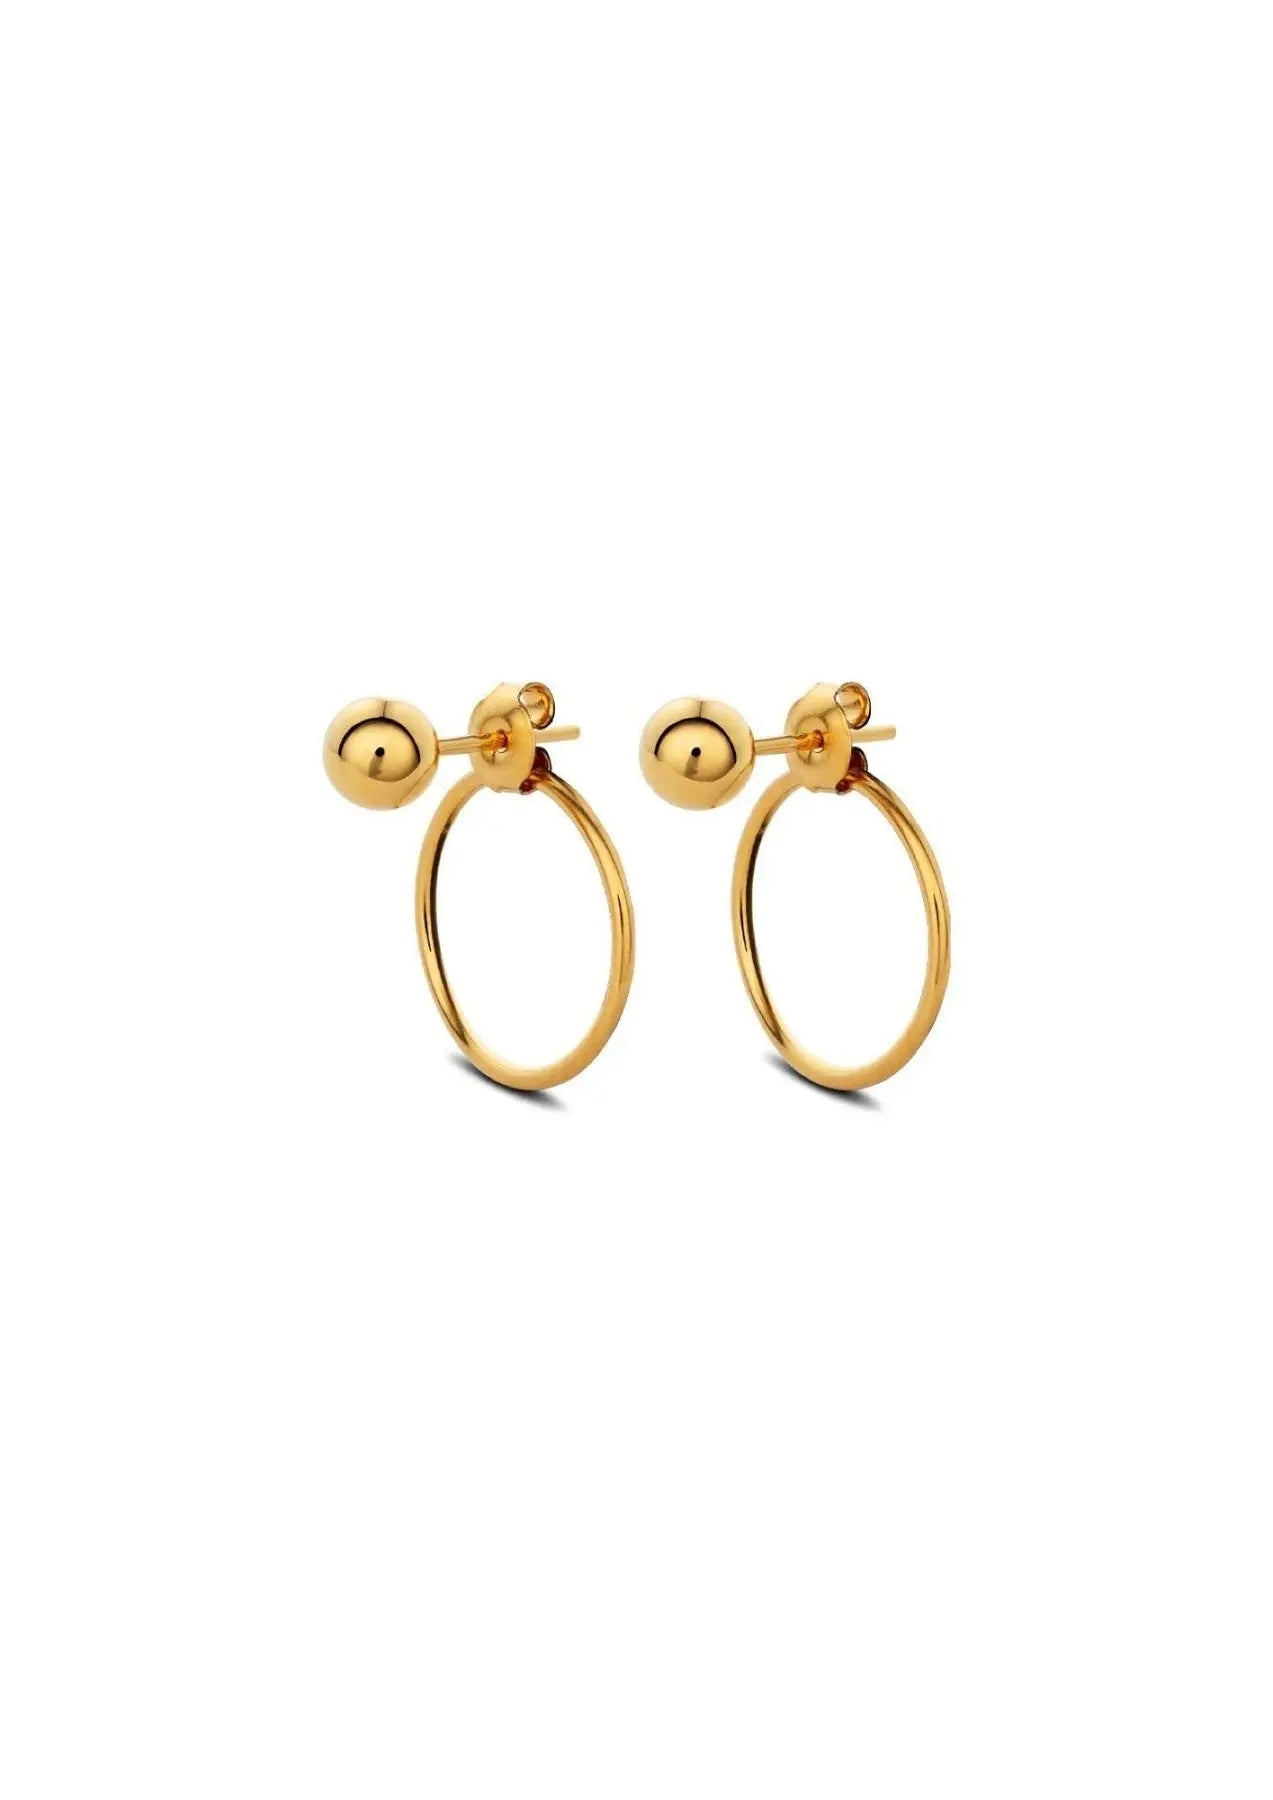 Front-facing Chord Earrings in gold, featuring a ball at the front and a circle at the back. Handmade with 24k gold plating on sterling silver, 1.2mm band, 18.2mm circle diameter, 3mm bead, push-back clasps.